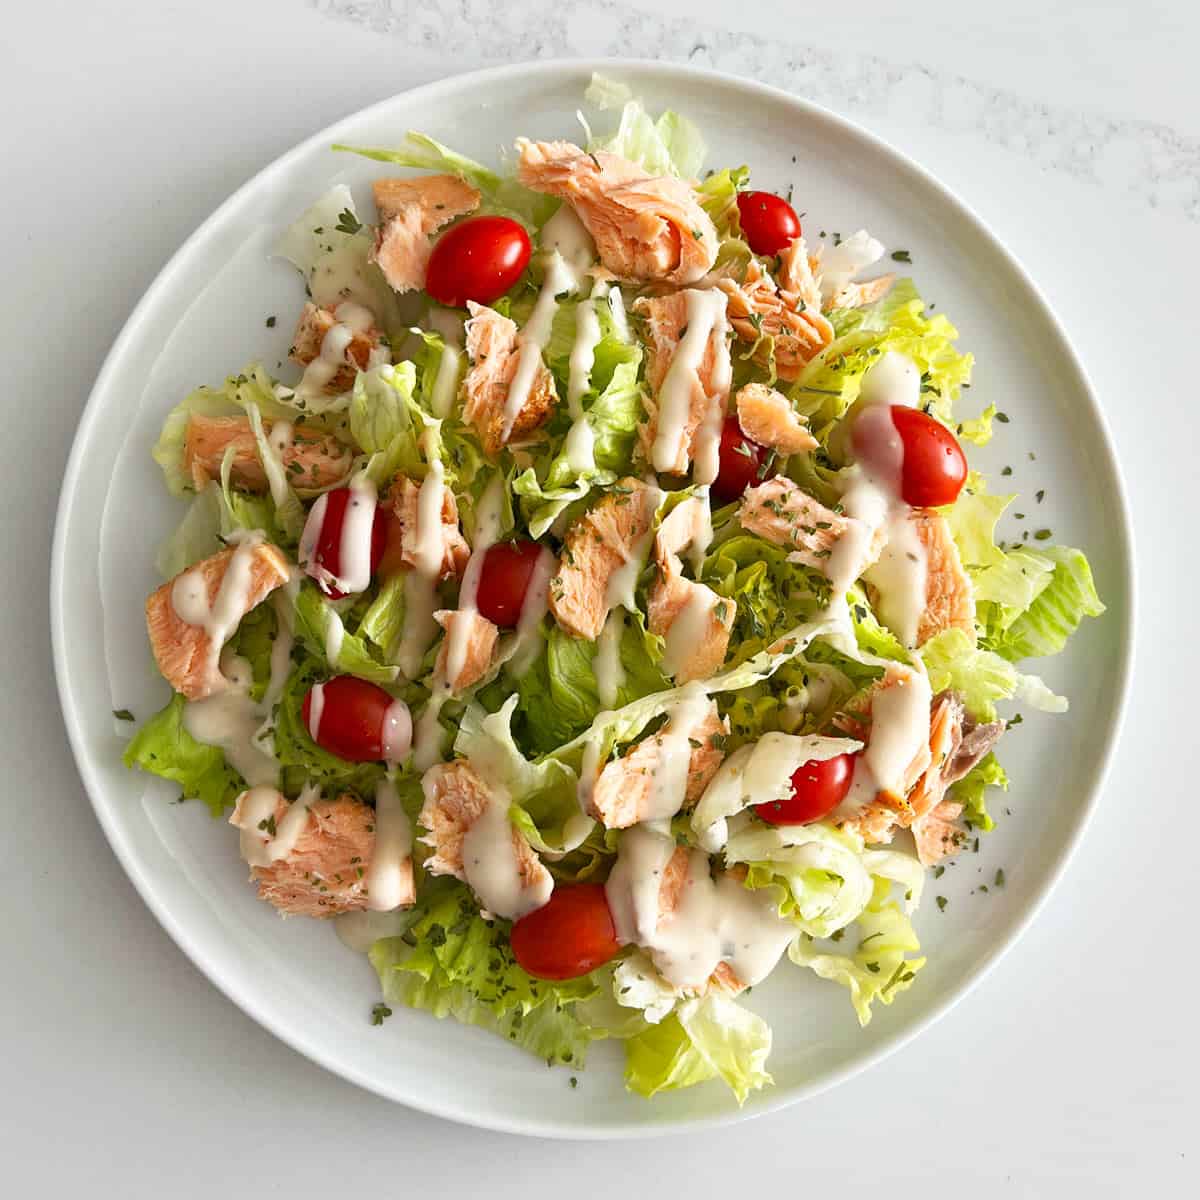 A salad made of lettuce, tomatoes, leftover salmon, and ranch dressing.